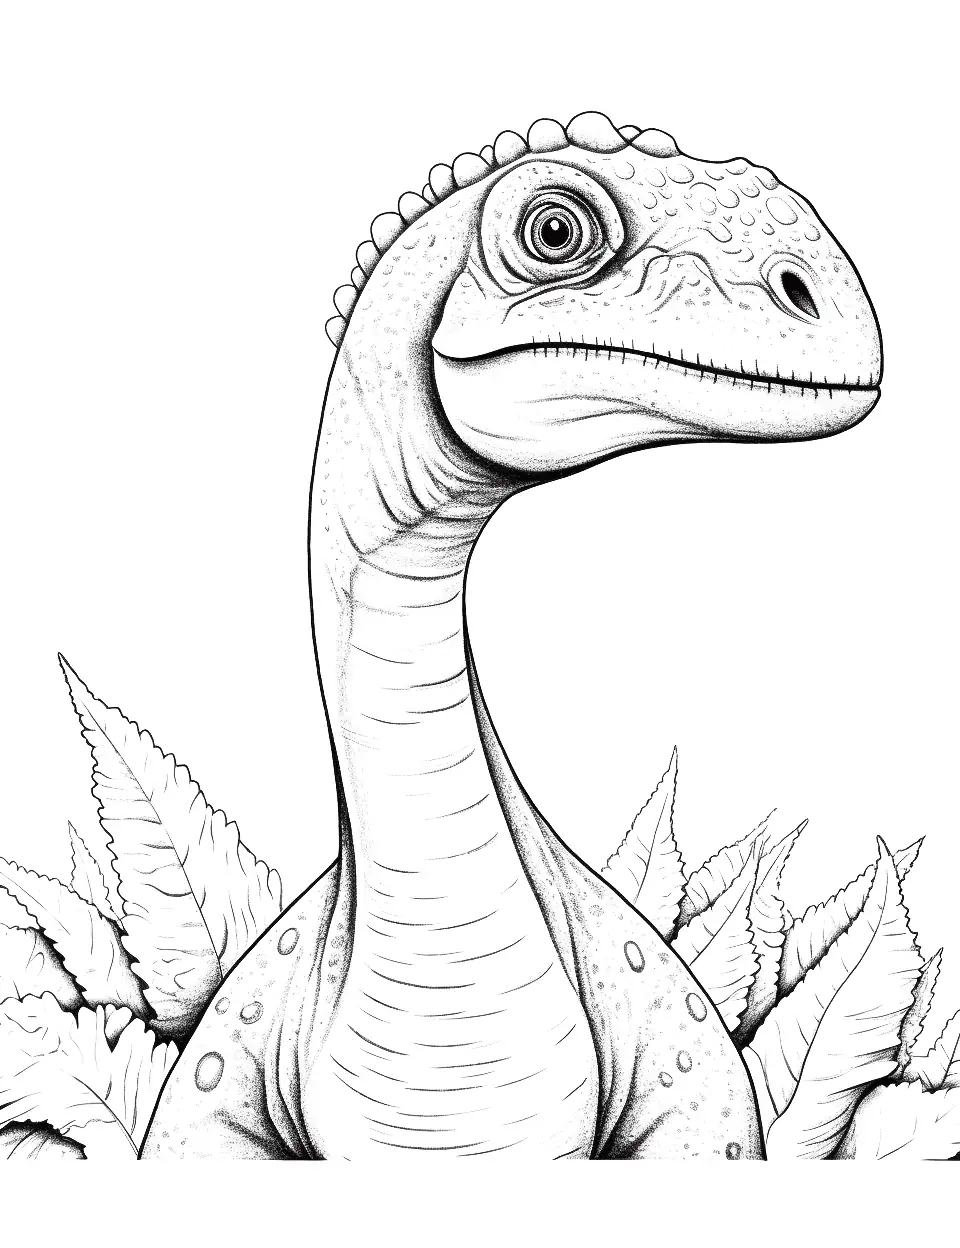 Realistic Velociraptor Coloring Page - A realistic, detailed Velociraptor in its natural environment.